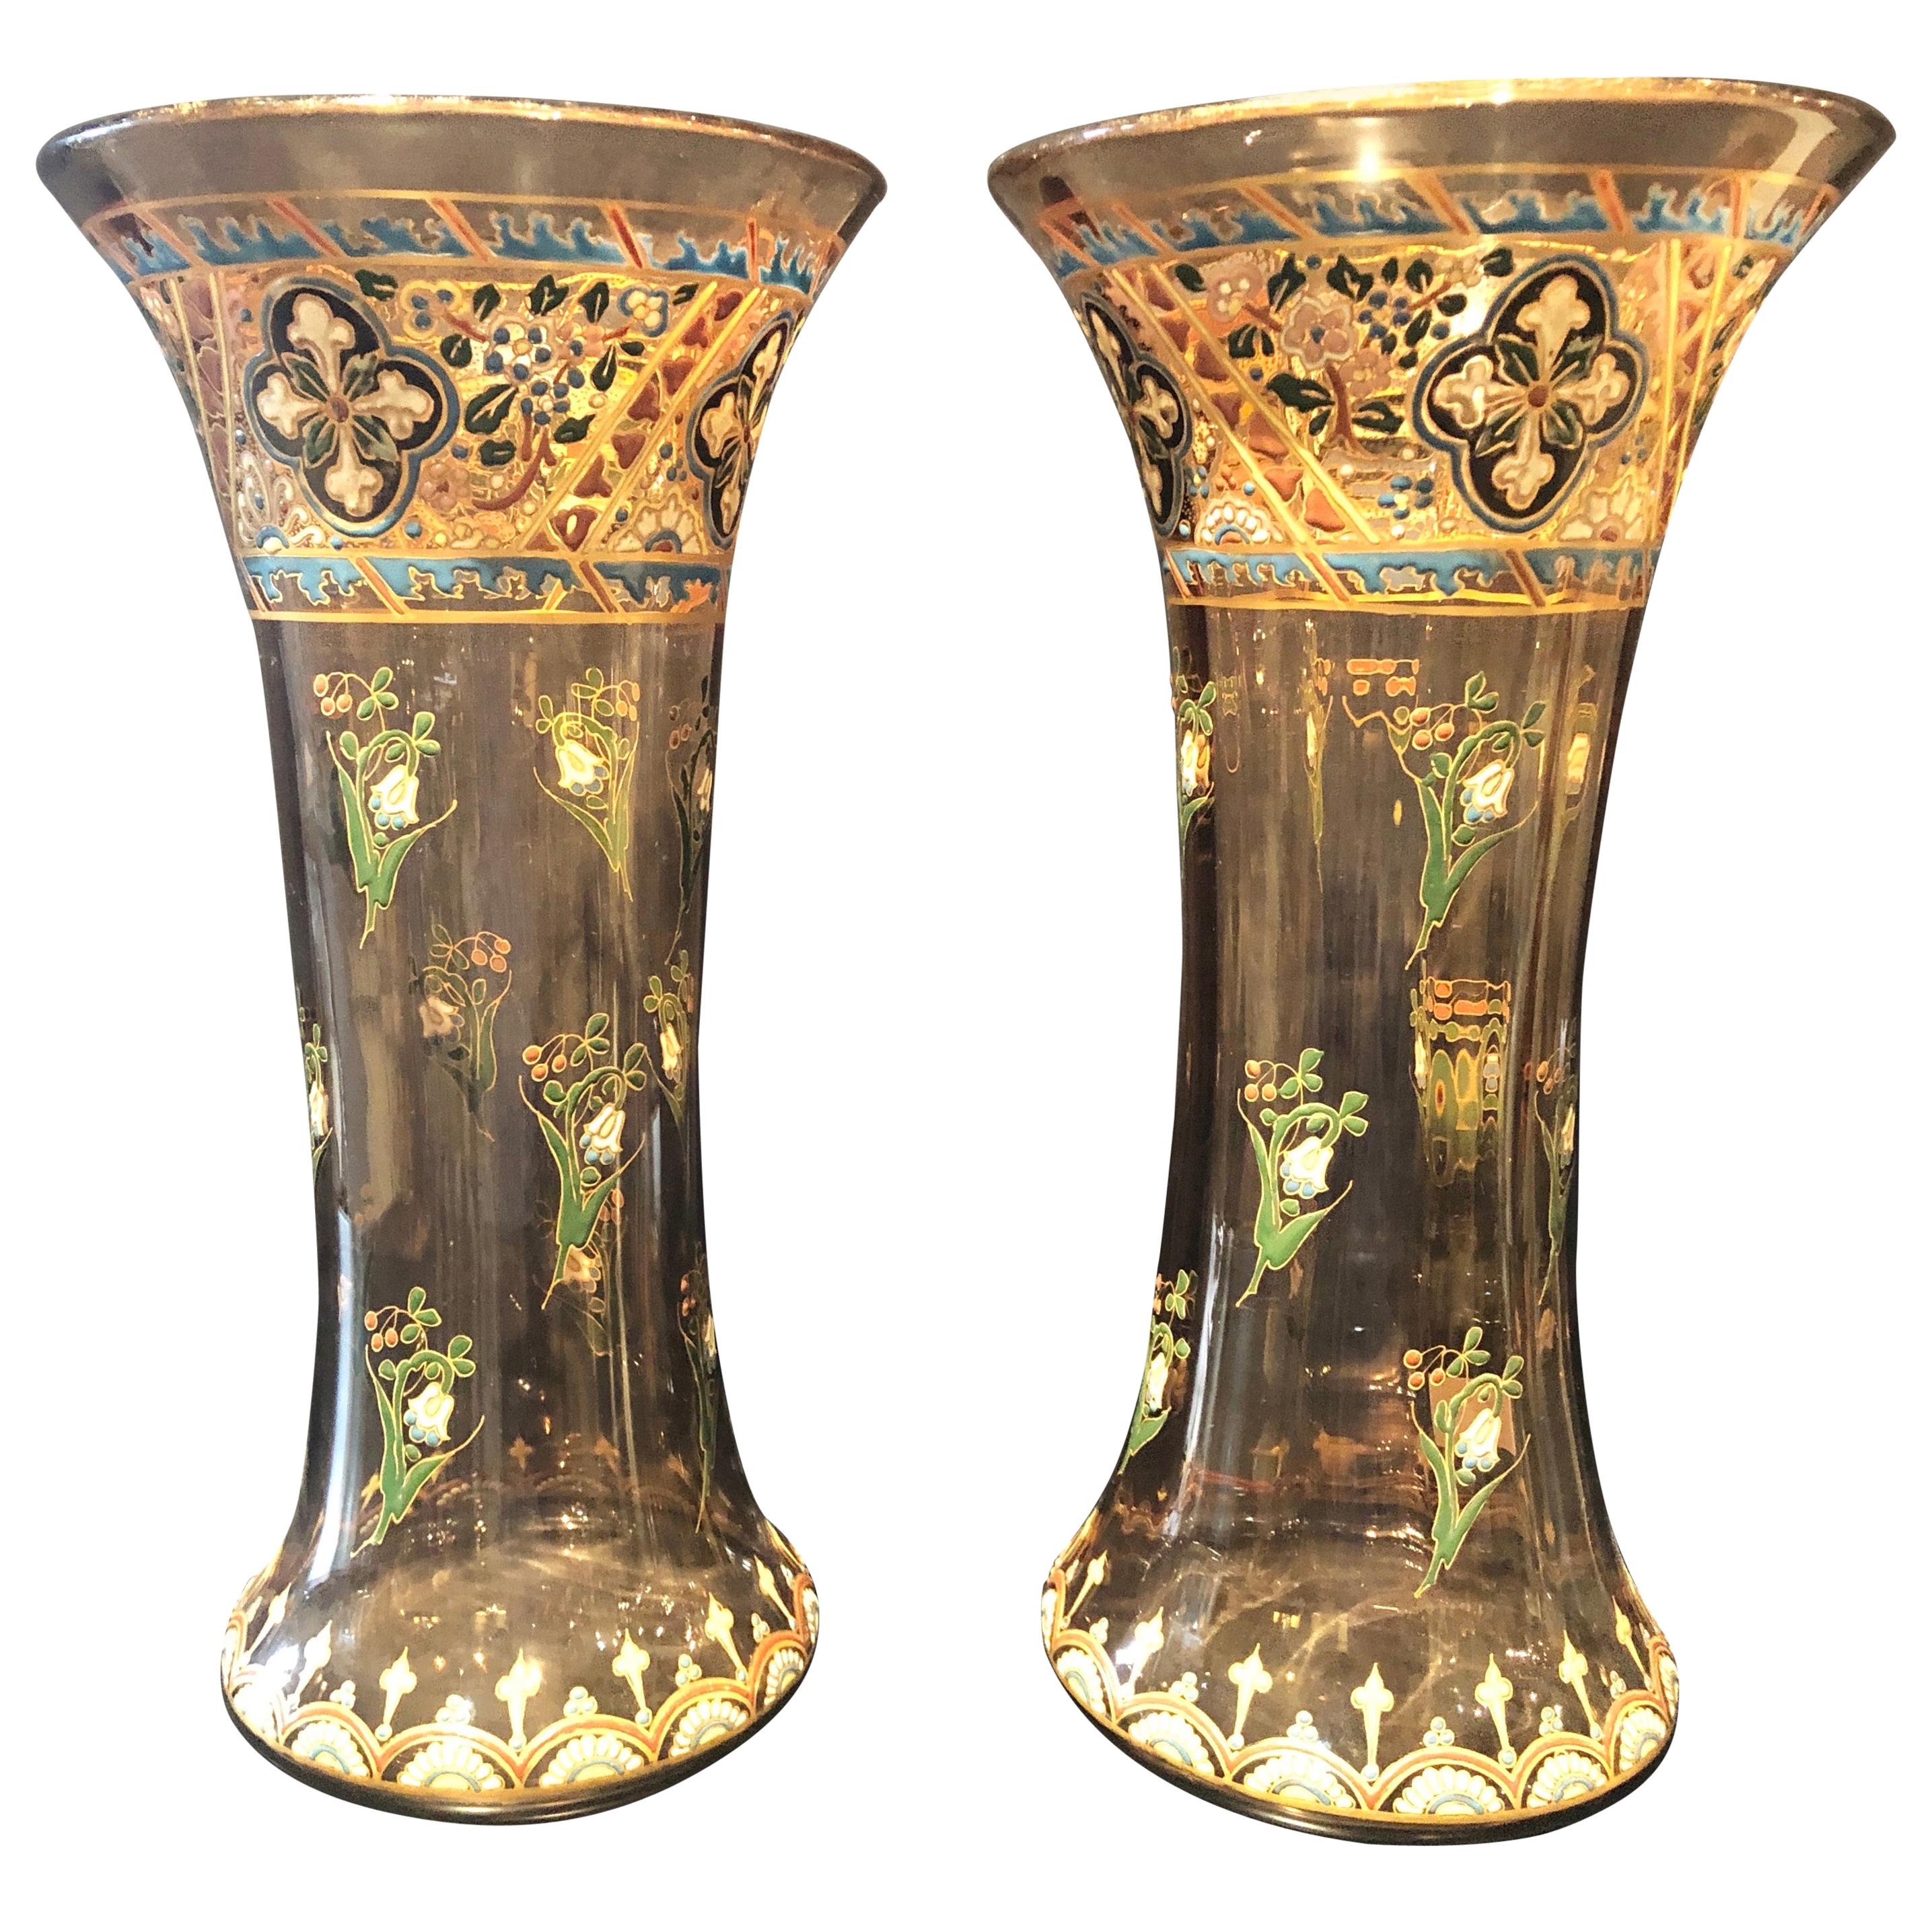 Pair of Antique Palatial French Jeweled Vases or Urns Emile Galle Style  For Sale